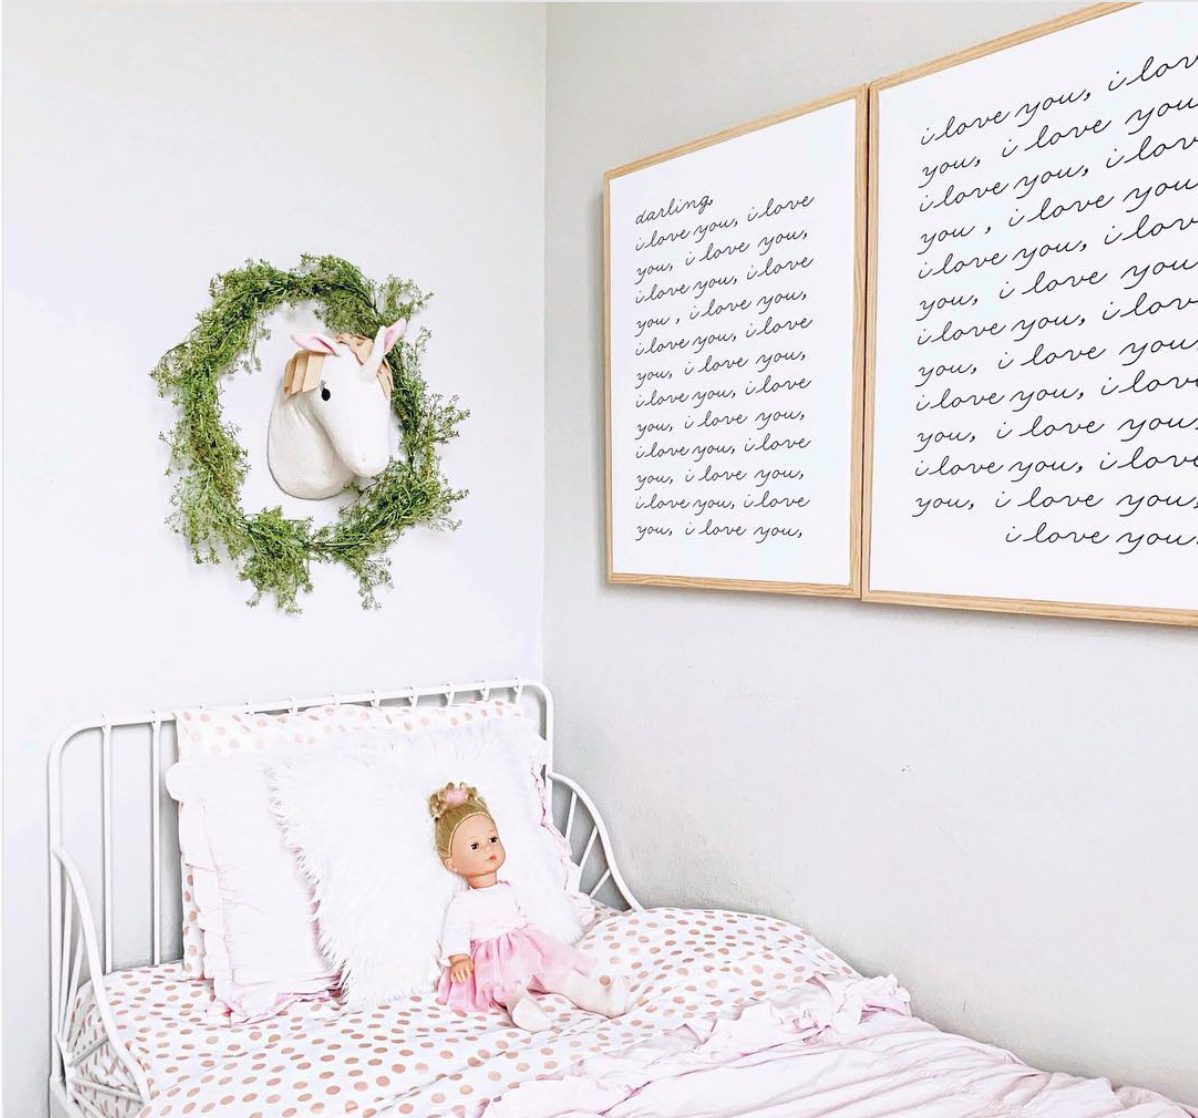 floral accent wall, toddler room, baby room, nursery, girl room, boy room, floor bed, montessori floor bed, kids decor, kids dream room, toddler bed, kids bed, house frame bed, teepee, kids fort, playroom, kids playroom, dream playroom, DIY house frame floor bed, DIY house bed, DIY floor bed, floor beds for toddlers, boho chic girls room, little girls room, dreamy girls bedroom, girl bedroom design